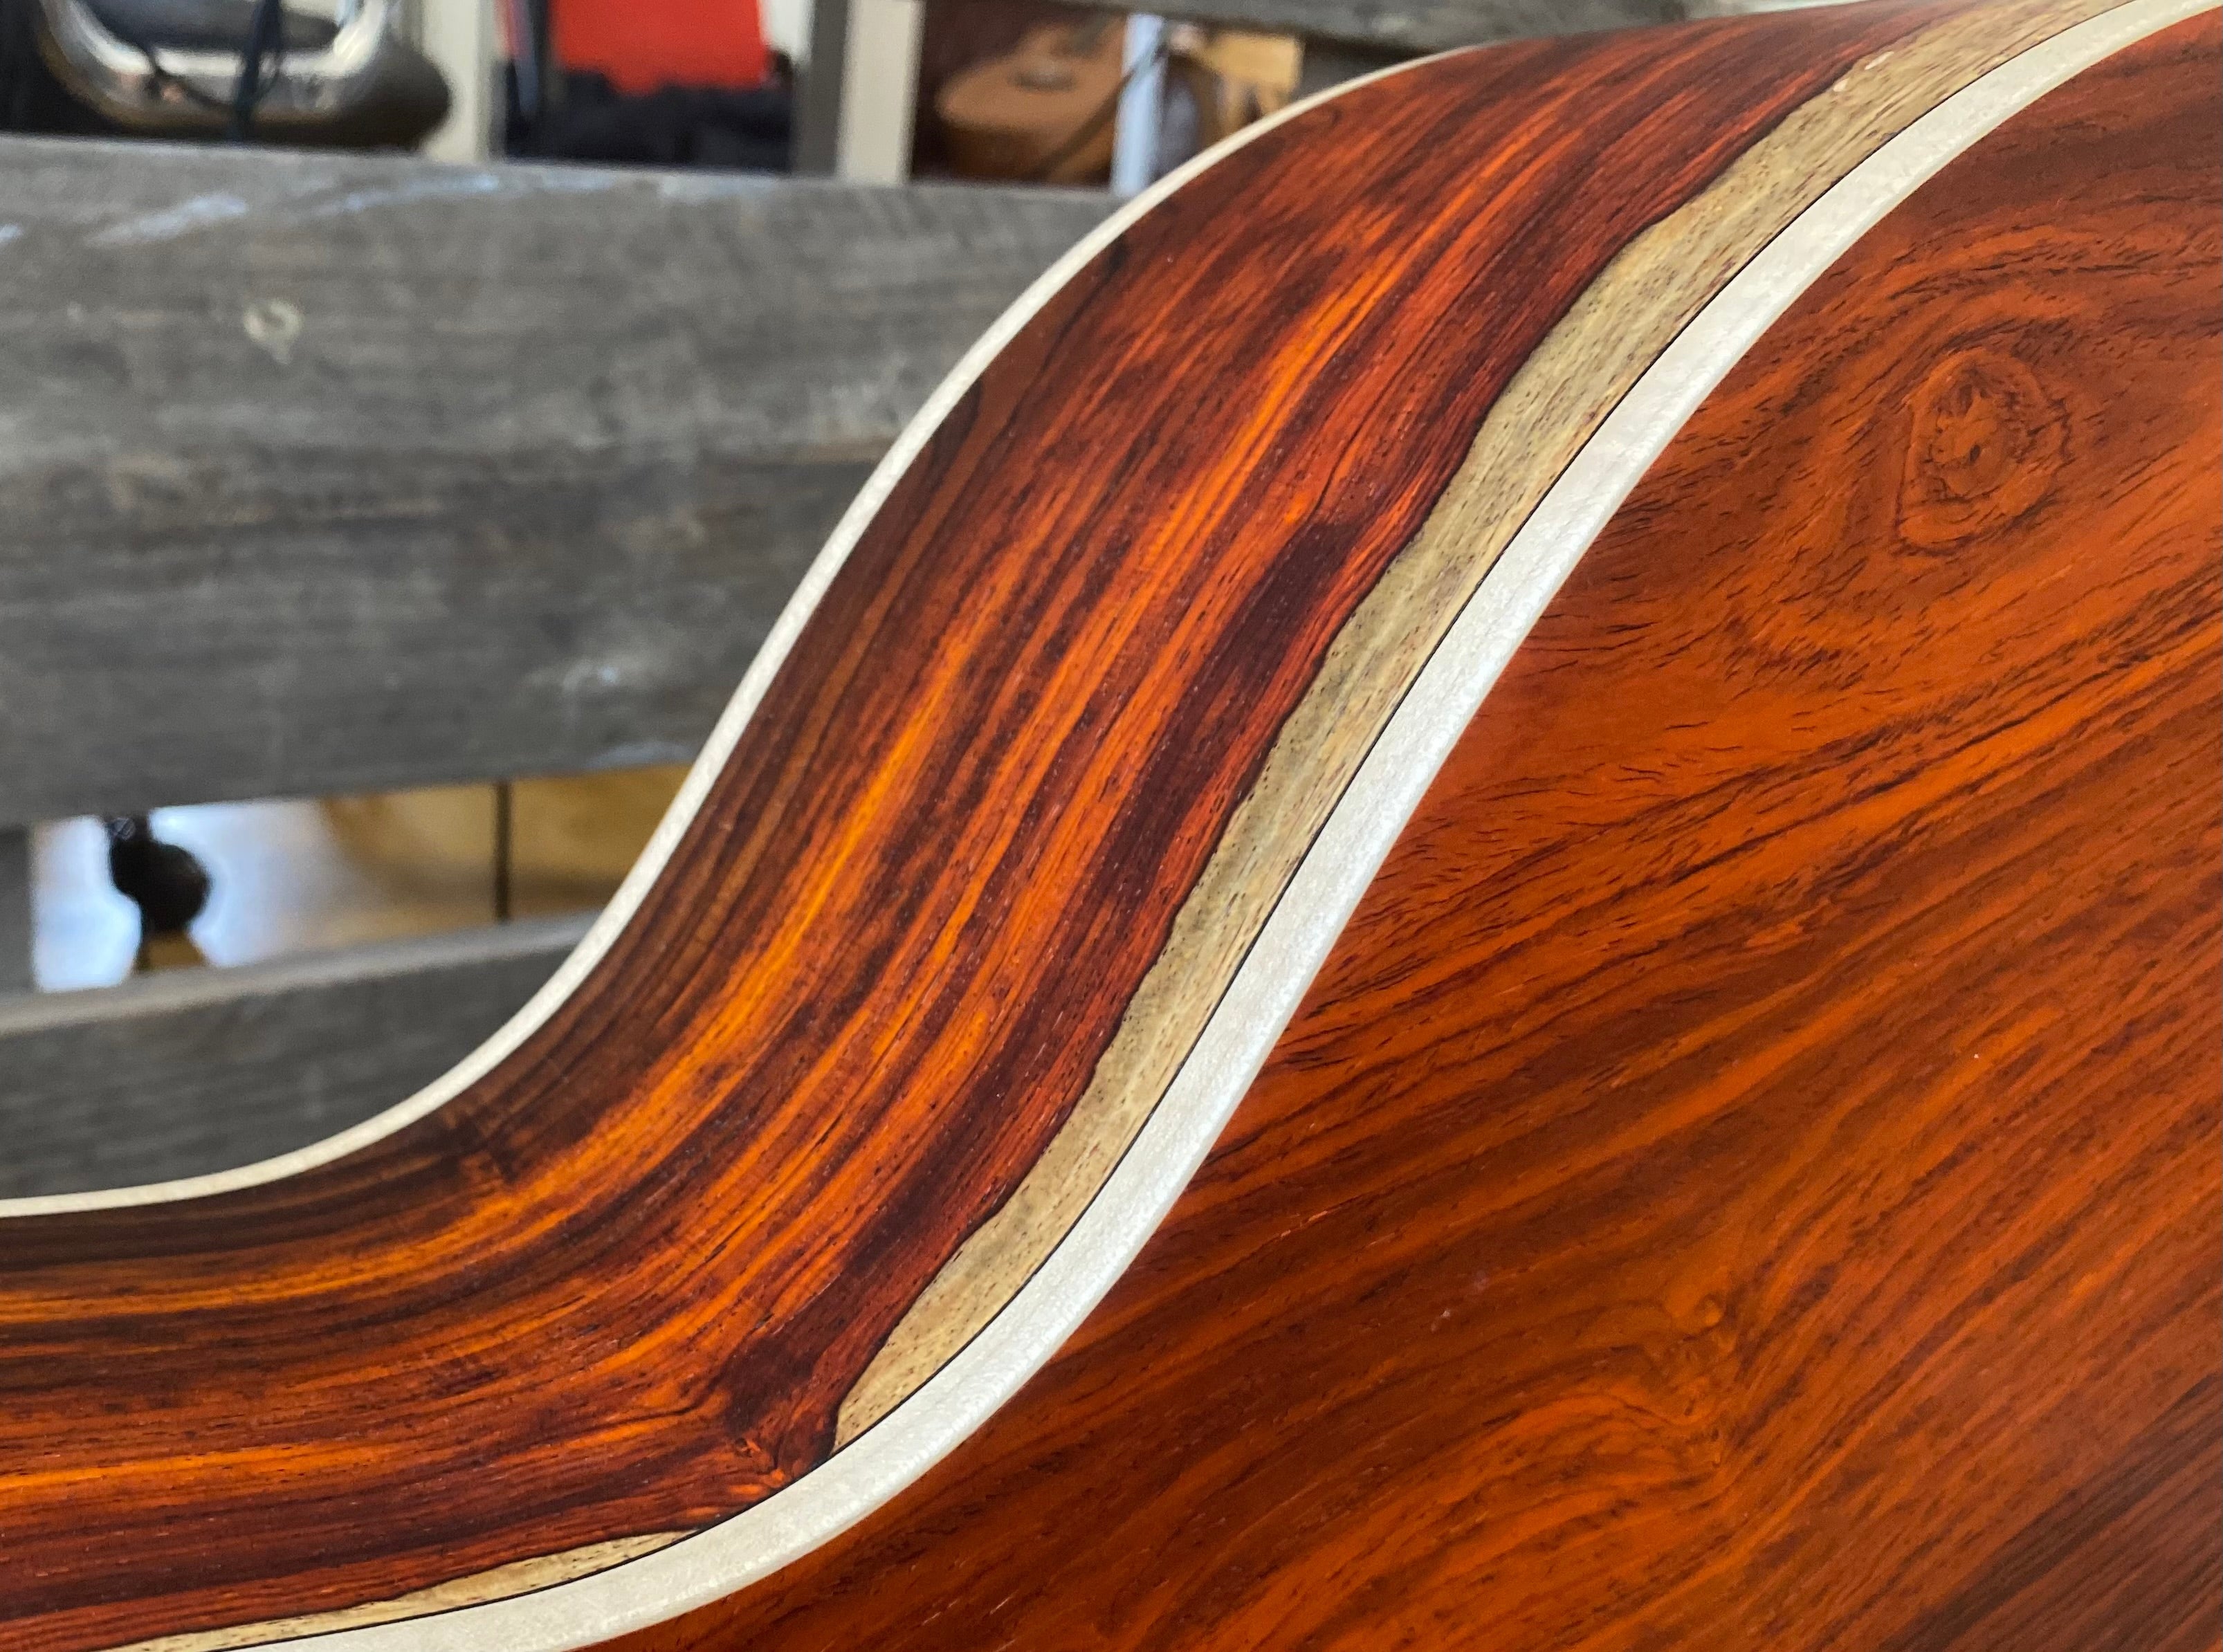 Dowina Cocobolo Trio Plate (Cocobolo III) GAC TSWS, Acoustic Guitar for sale at Richards Guitars.